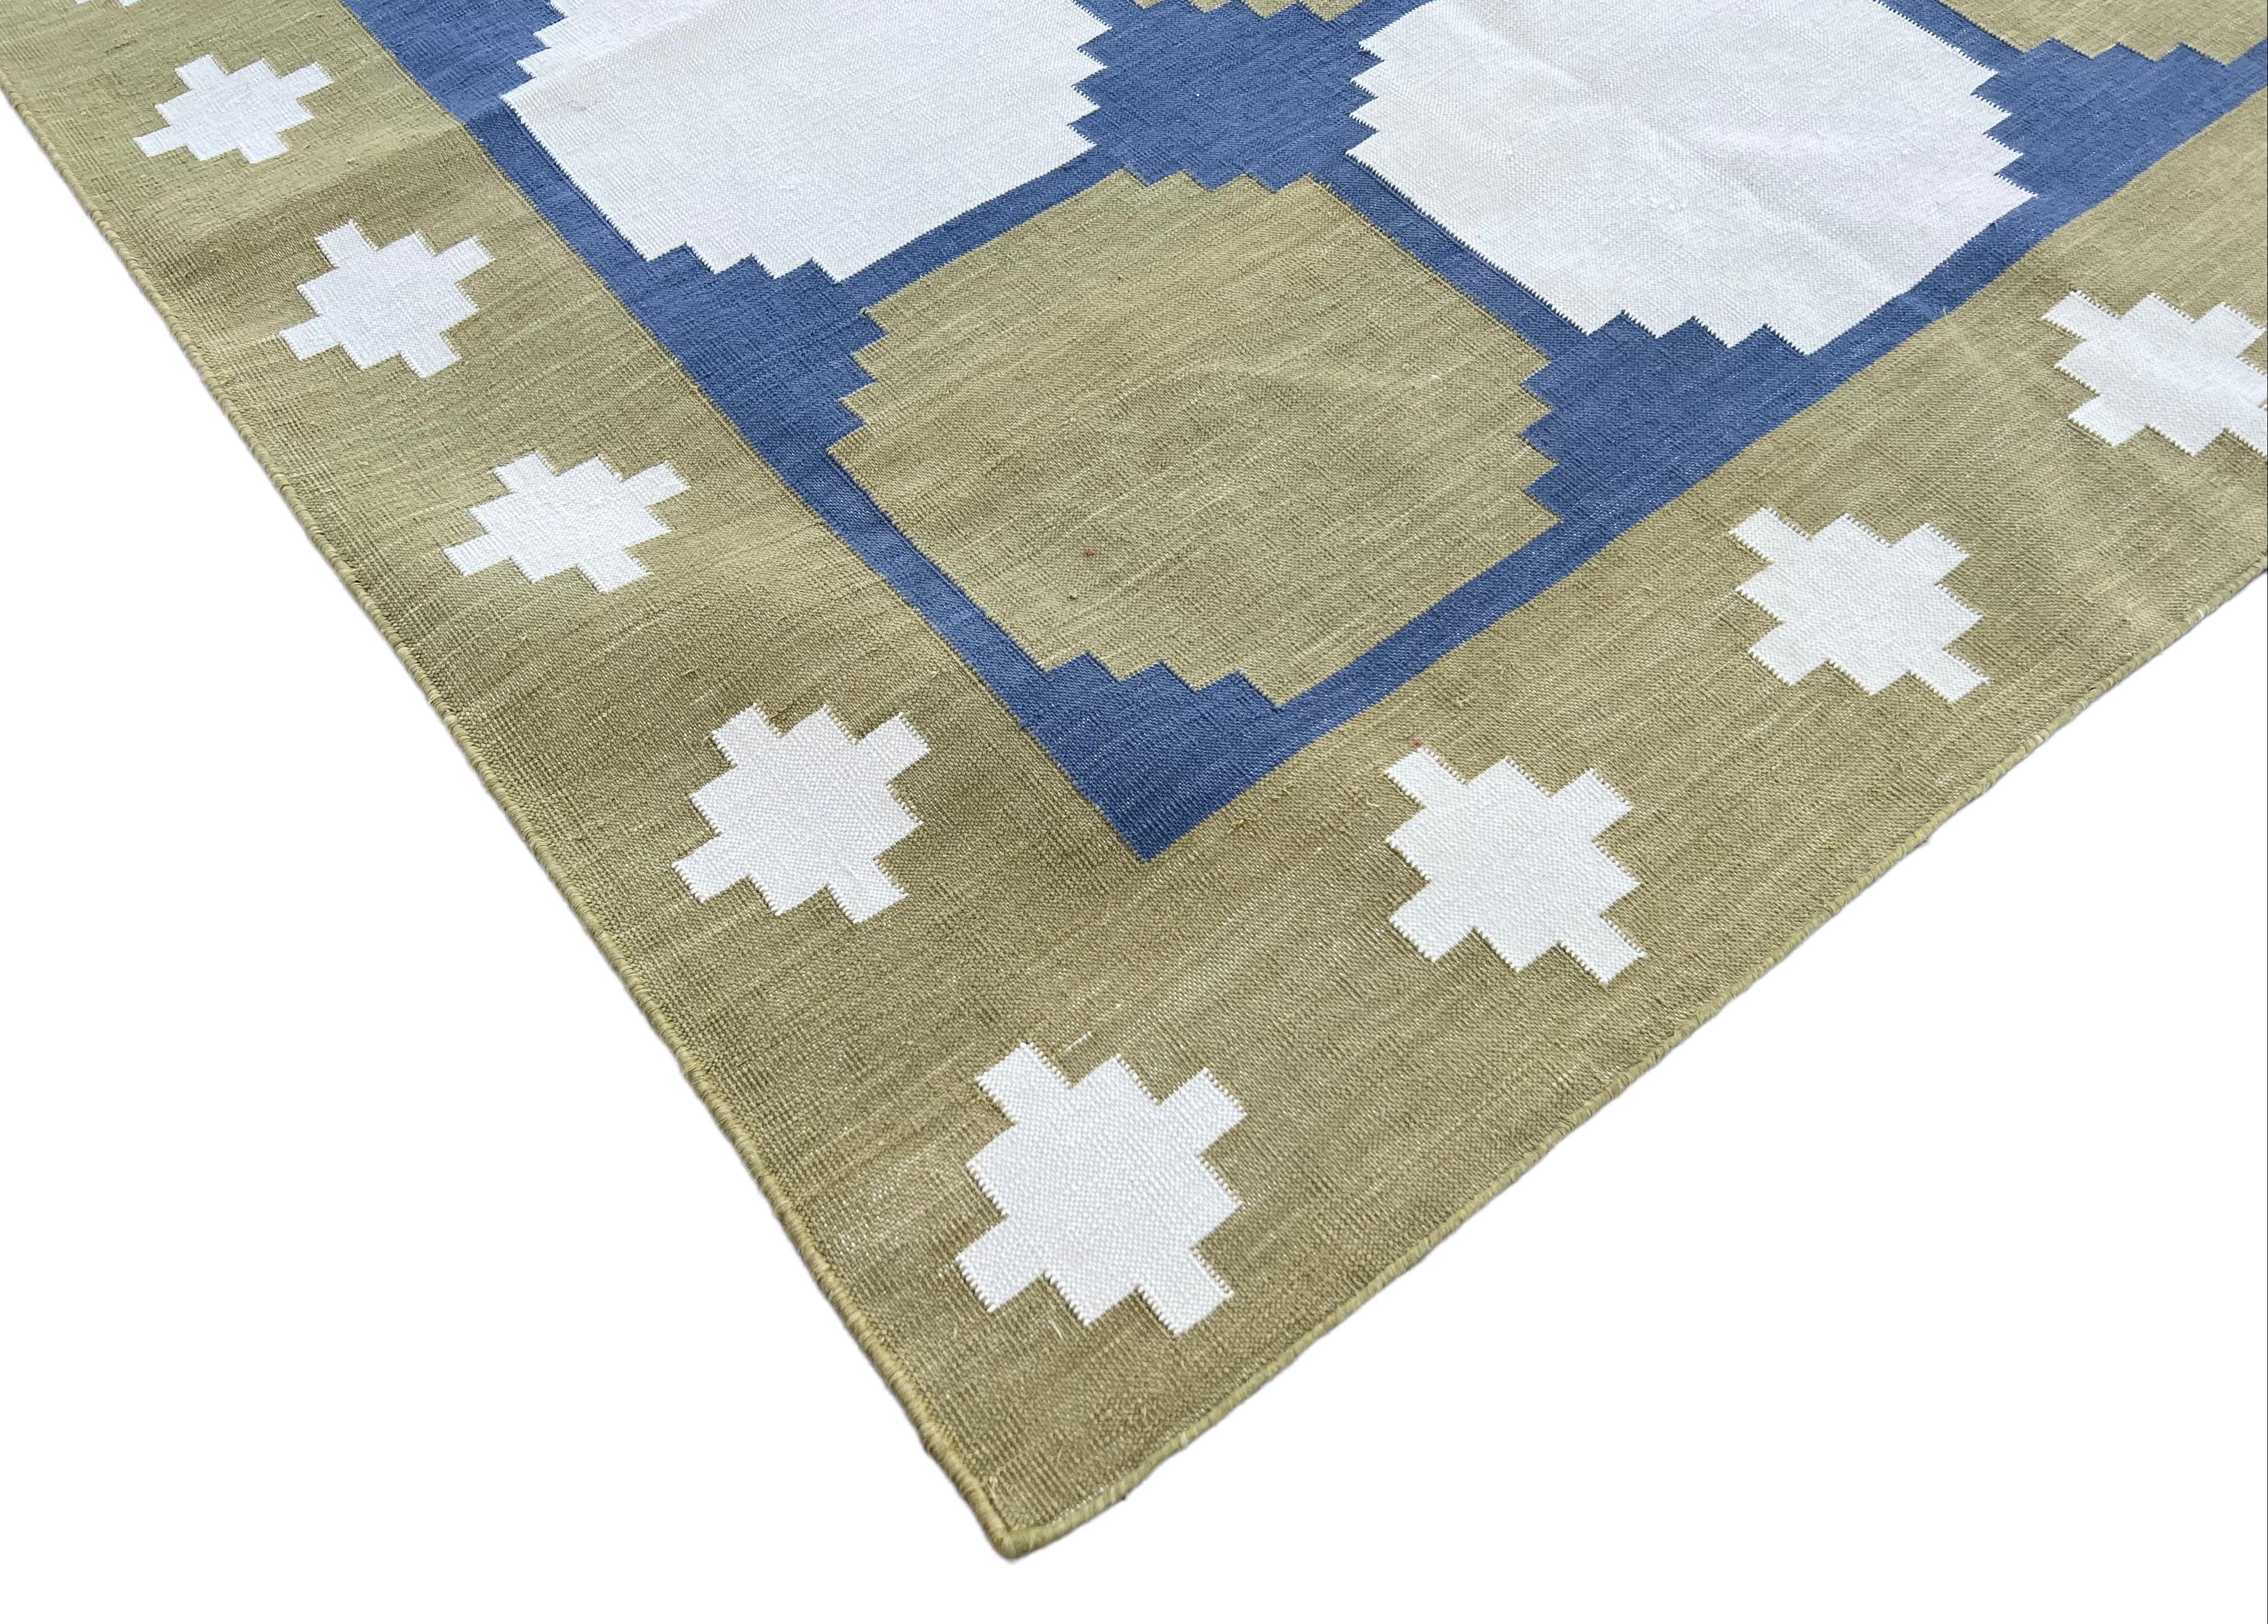 Cotton Vegetable Dyed Reversible Olive Green, Blue And Cream Geometric Patterned Tile Indian Rug - 8'x10'
These special flat-weave dhurries are hand-woven with 15 ply 100% cotton yarn. Due to the special manufacturing techniques used to create our